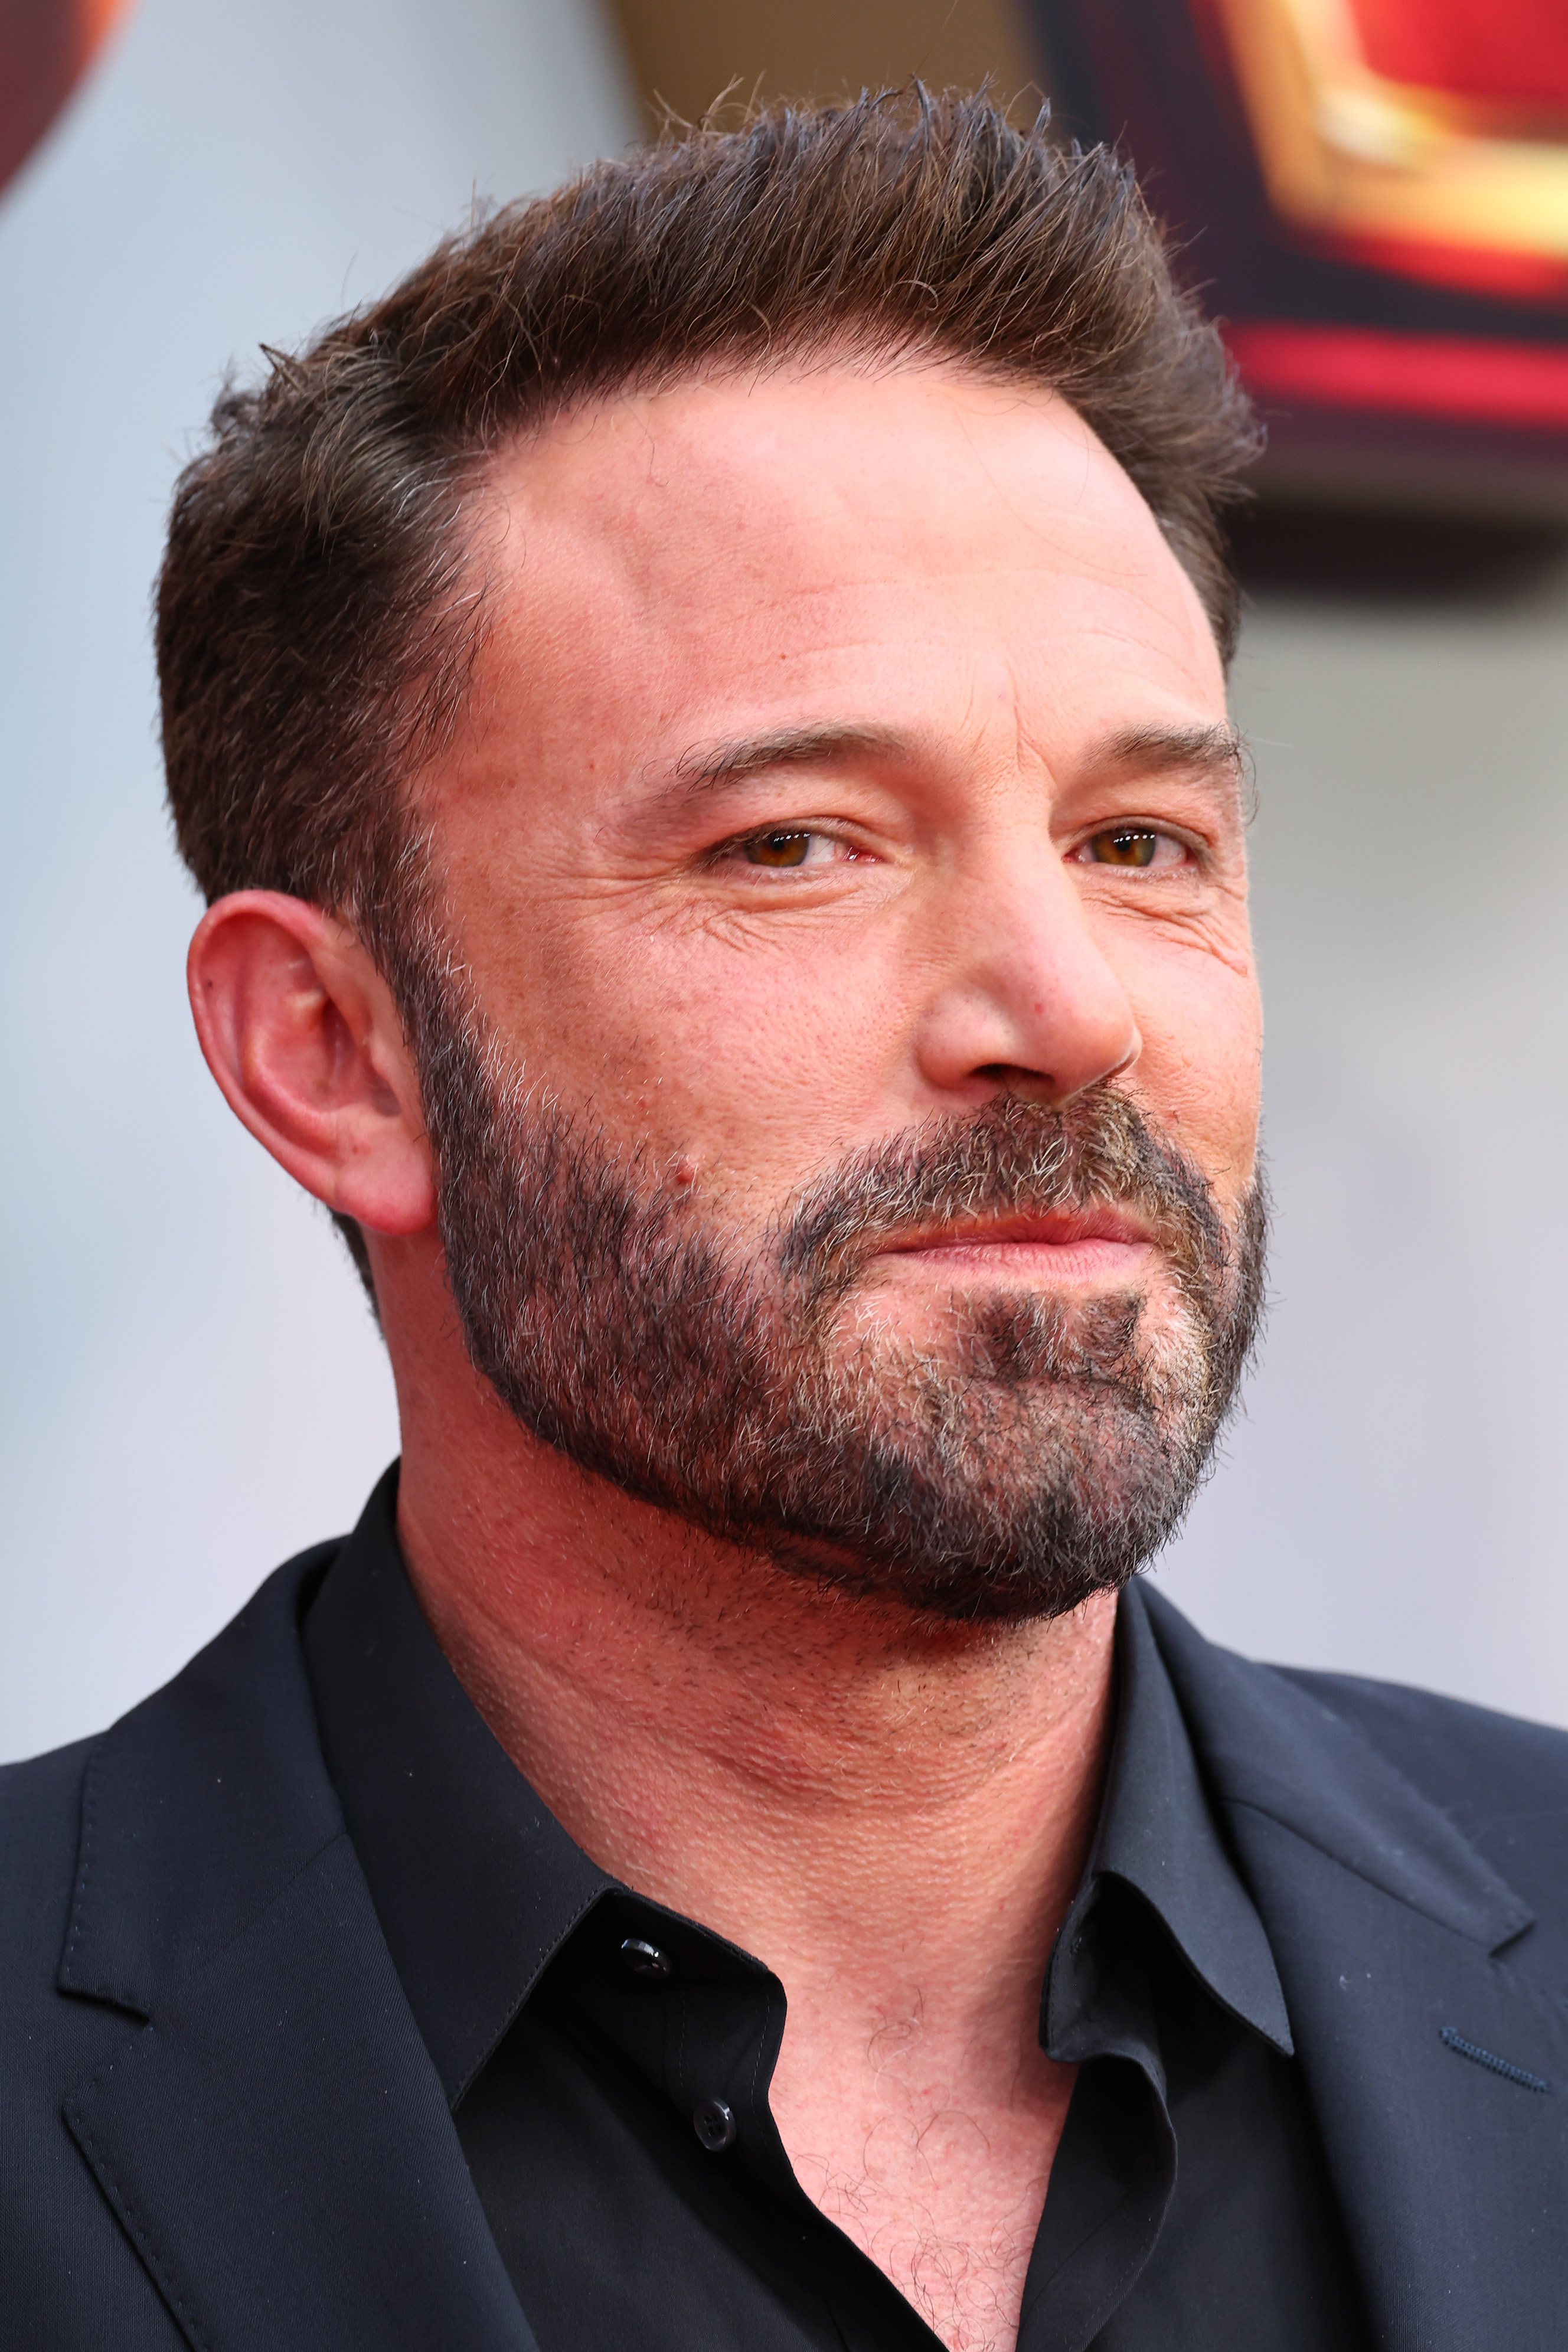 Ben Affleck at the premiere of "The Flash" in Los Angeles in 2023 | Source: Getty Images